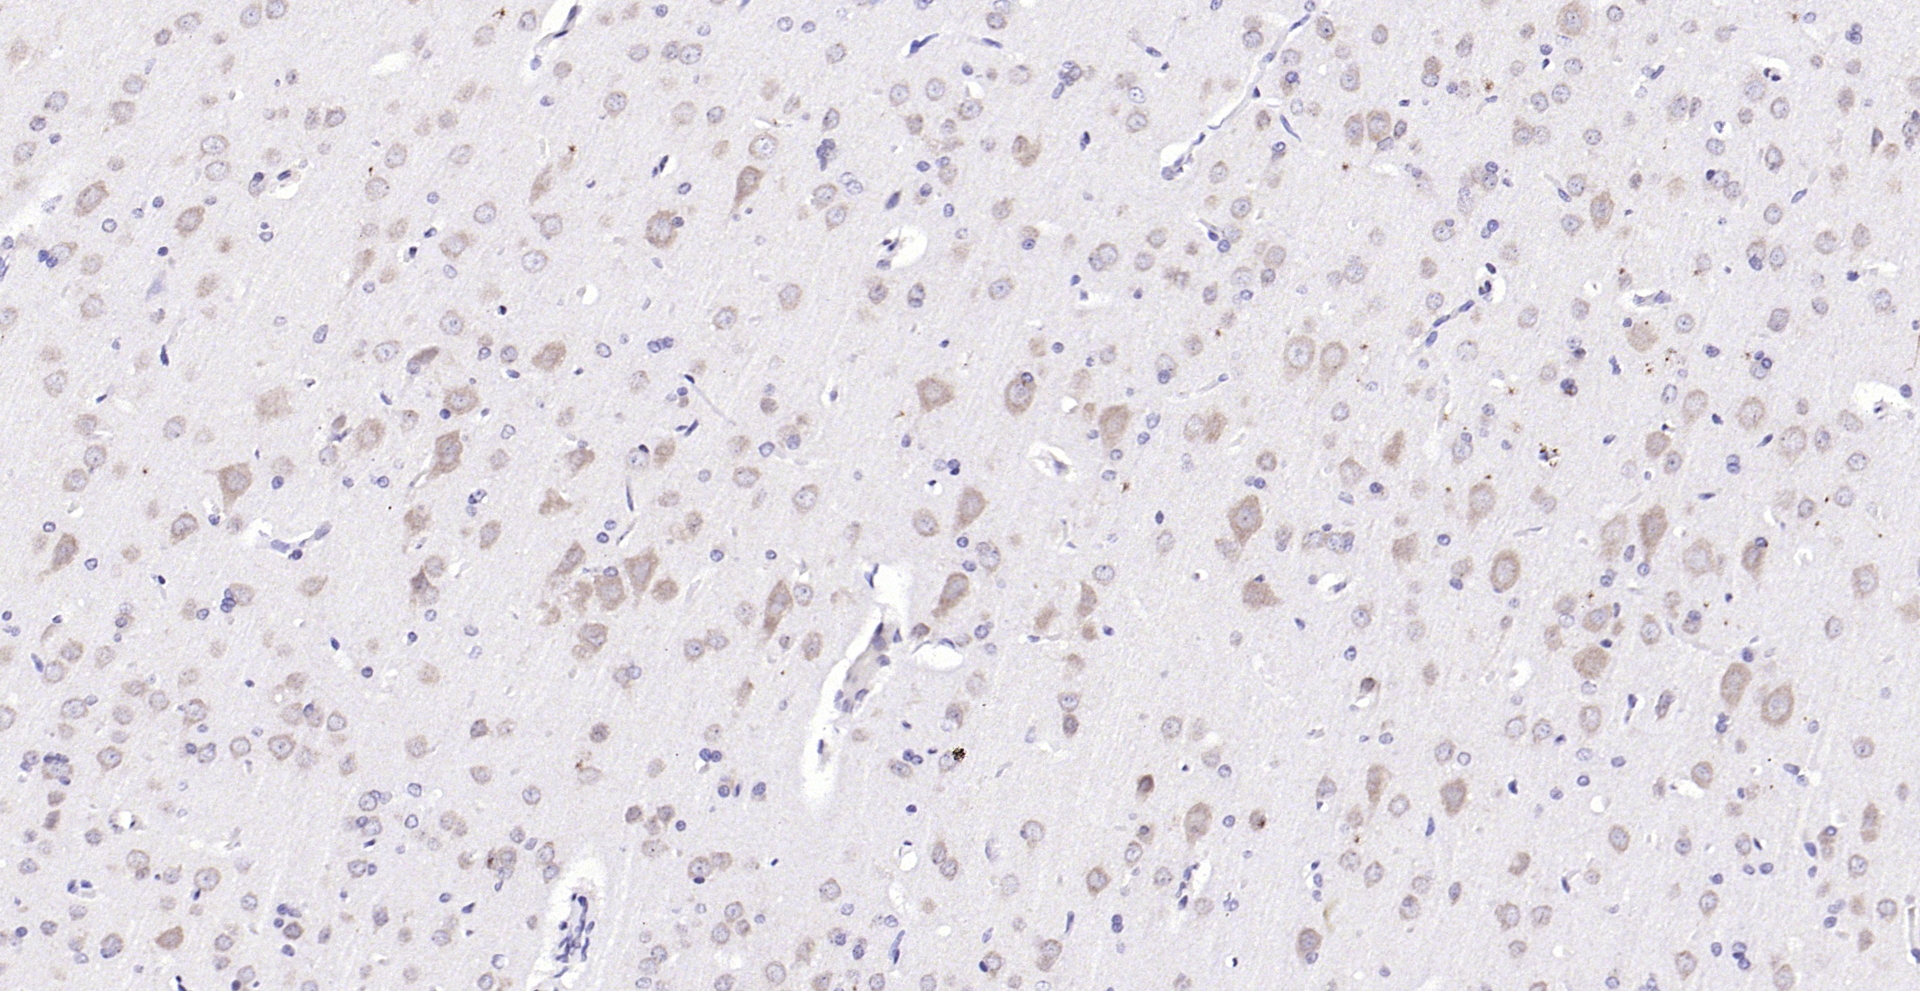 Paraformaldehyde-fixed, paraffin embedded (rat brain); Antigen retrieval by boiling in sodium citrate buffer (pH6.0) for 15min; Block endogenous peroxidase by 3% hydrogen peroxide for 20 minutes; Blocking buffer (normal goat serum) at 37°C for 30min; Antibody incubation with (phospho-FMRP (Ser500)) Polyclonal Antibody, Unconjugated (bs-13188R) at 1:200 overnight at 4°C, followed by operating according to SP Kit(Rabbit) (sp-0023) instructionsand DAB staining.